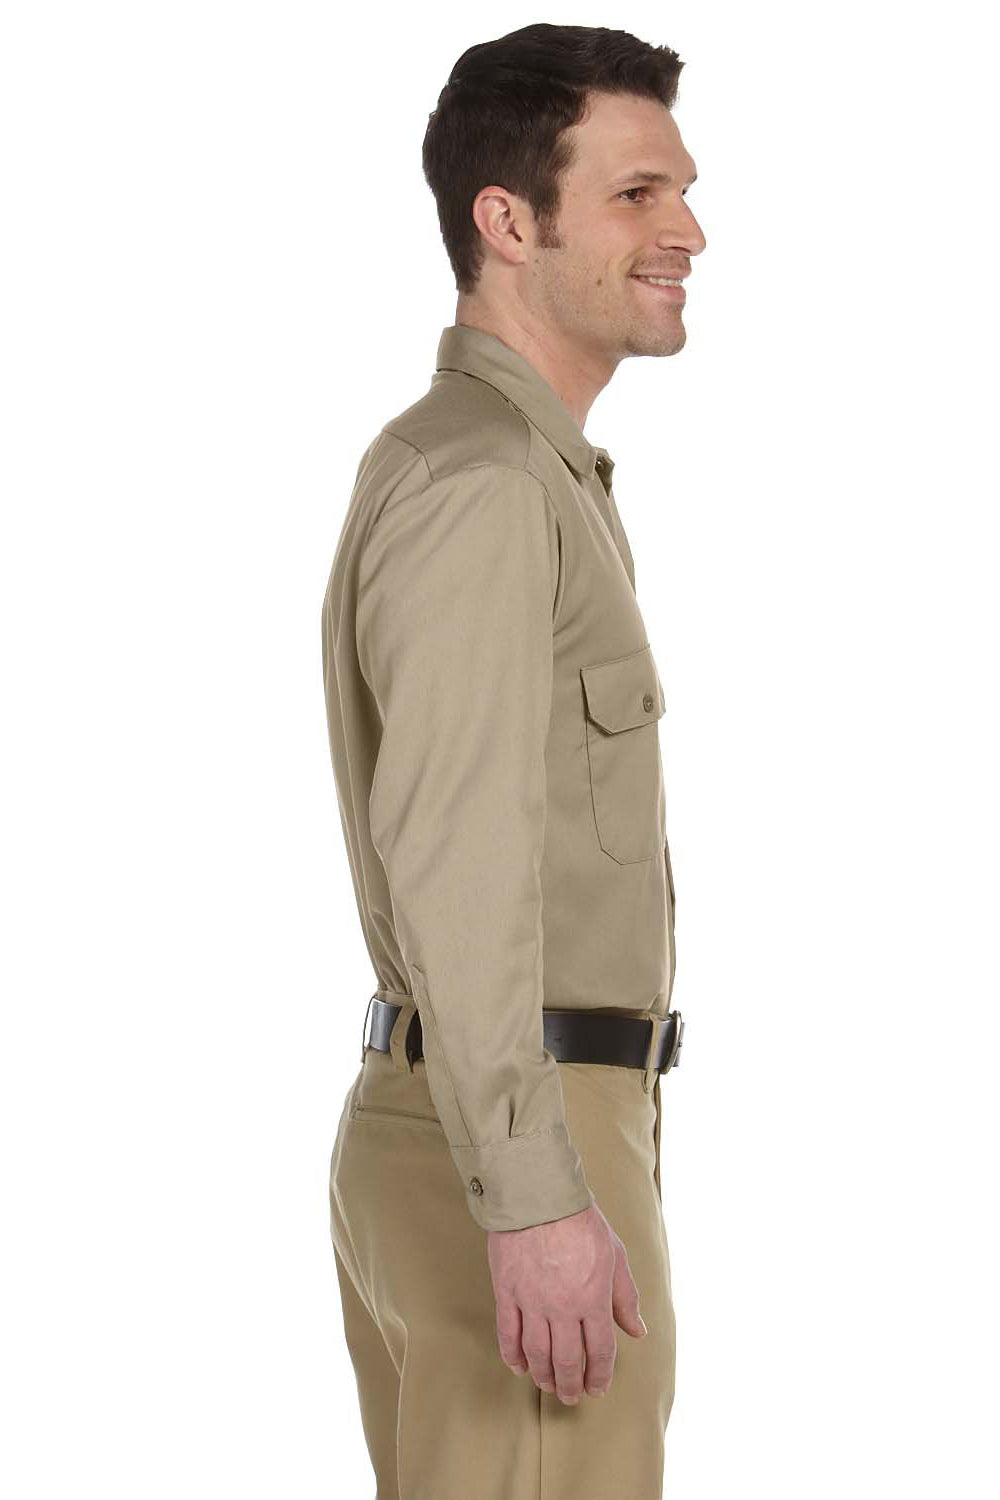 Dickies 574 Mens Moisture Wicking Long Sleeve Button Down Shirt w/ Double Pockets Khaki Brown Side